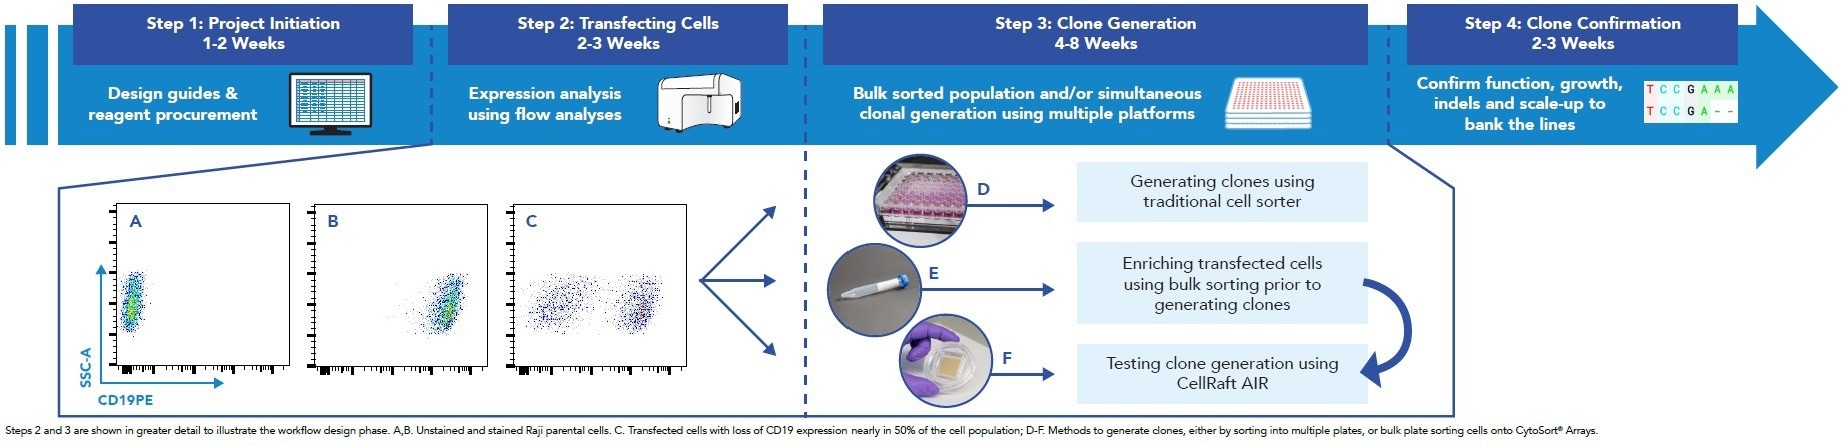 How to accelerate the generation of single-cell clones